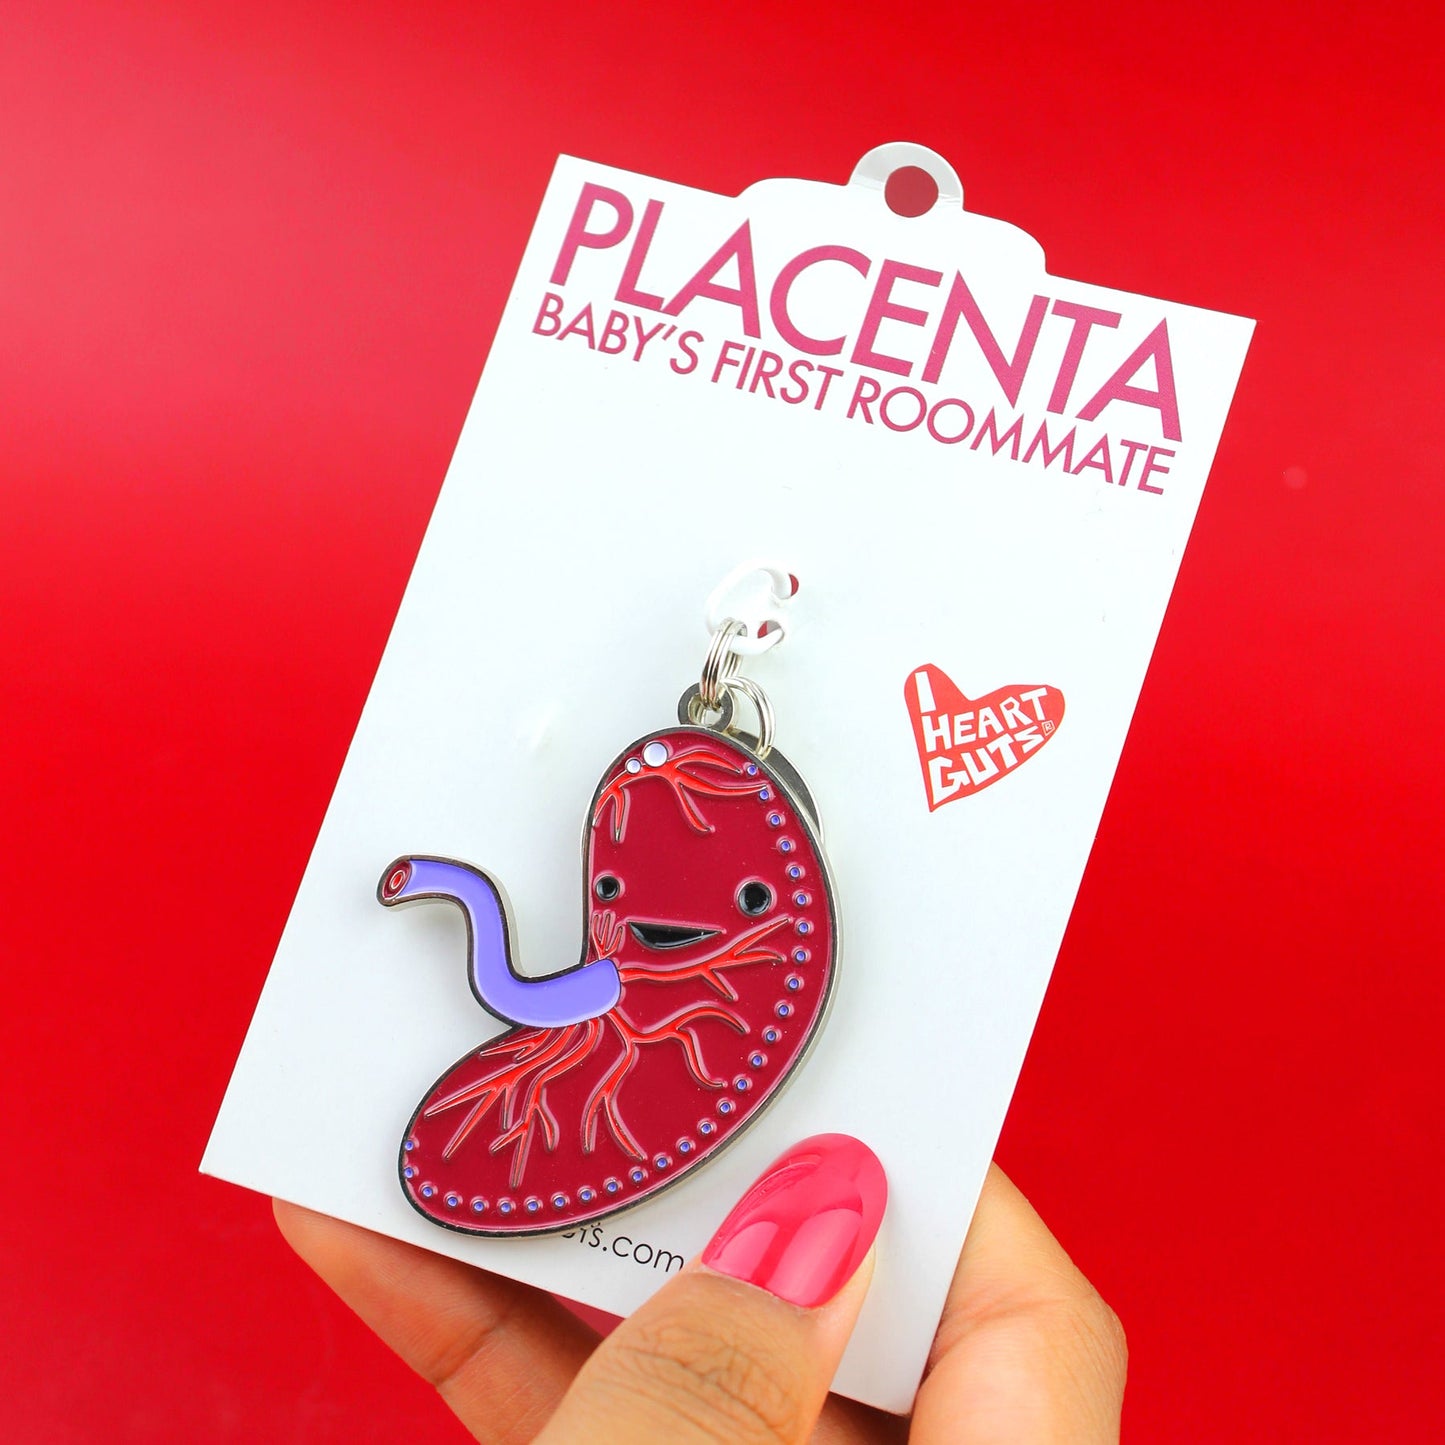 Placenta Keychain - Baby's First Roommate